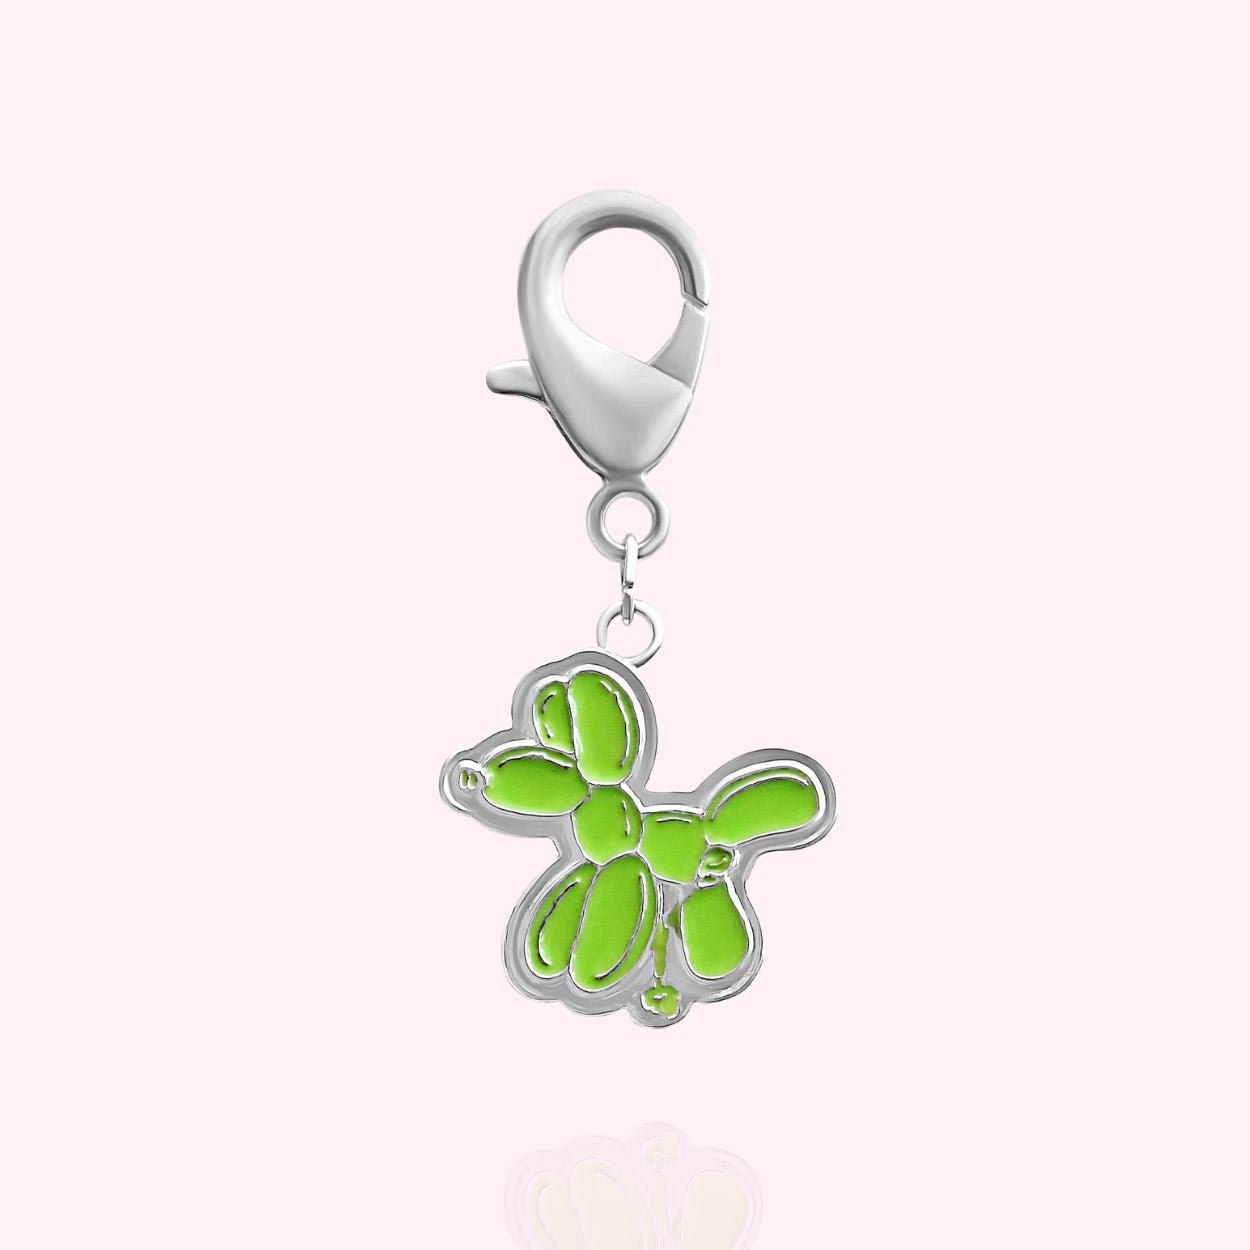 Balloon Dog Collar Charm - Silver - Doggy Style Pet Products